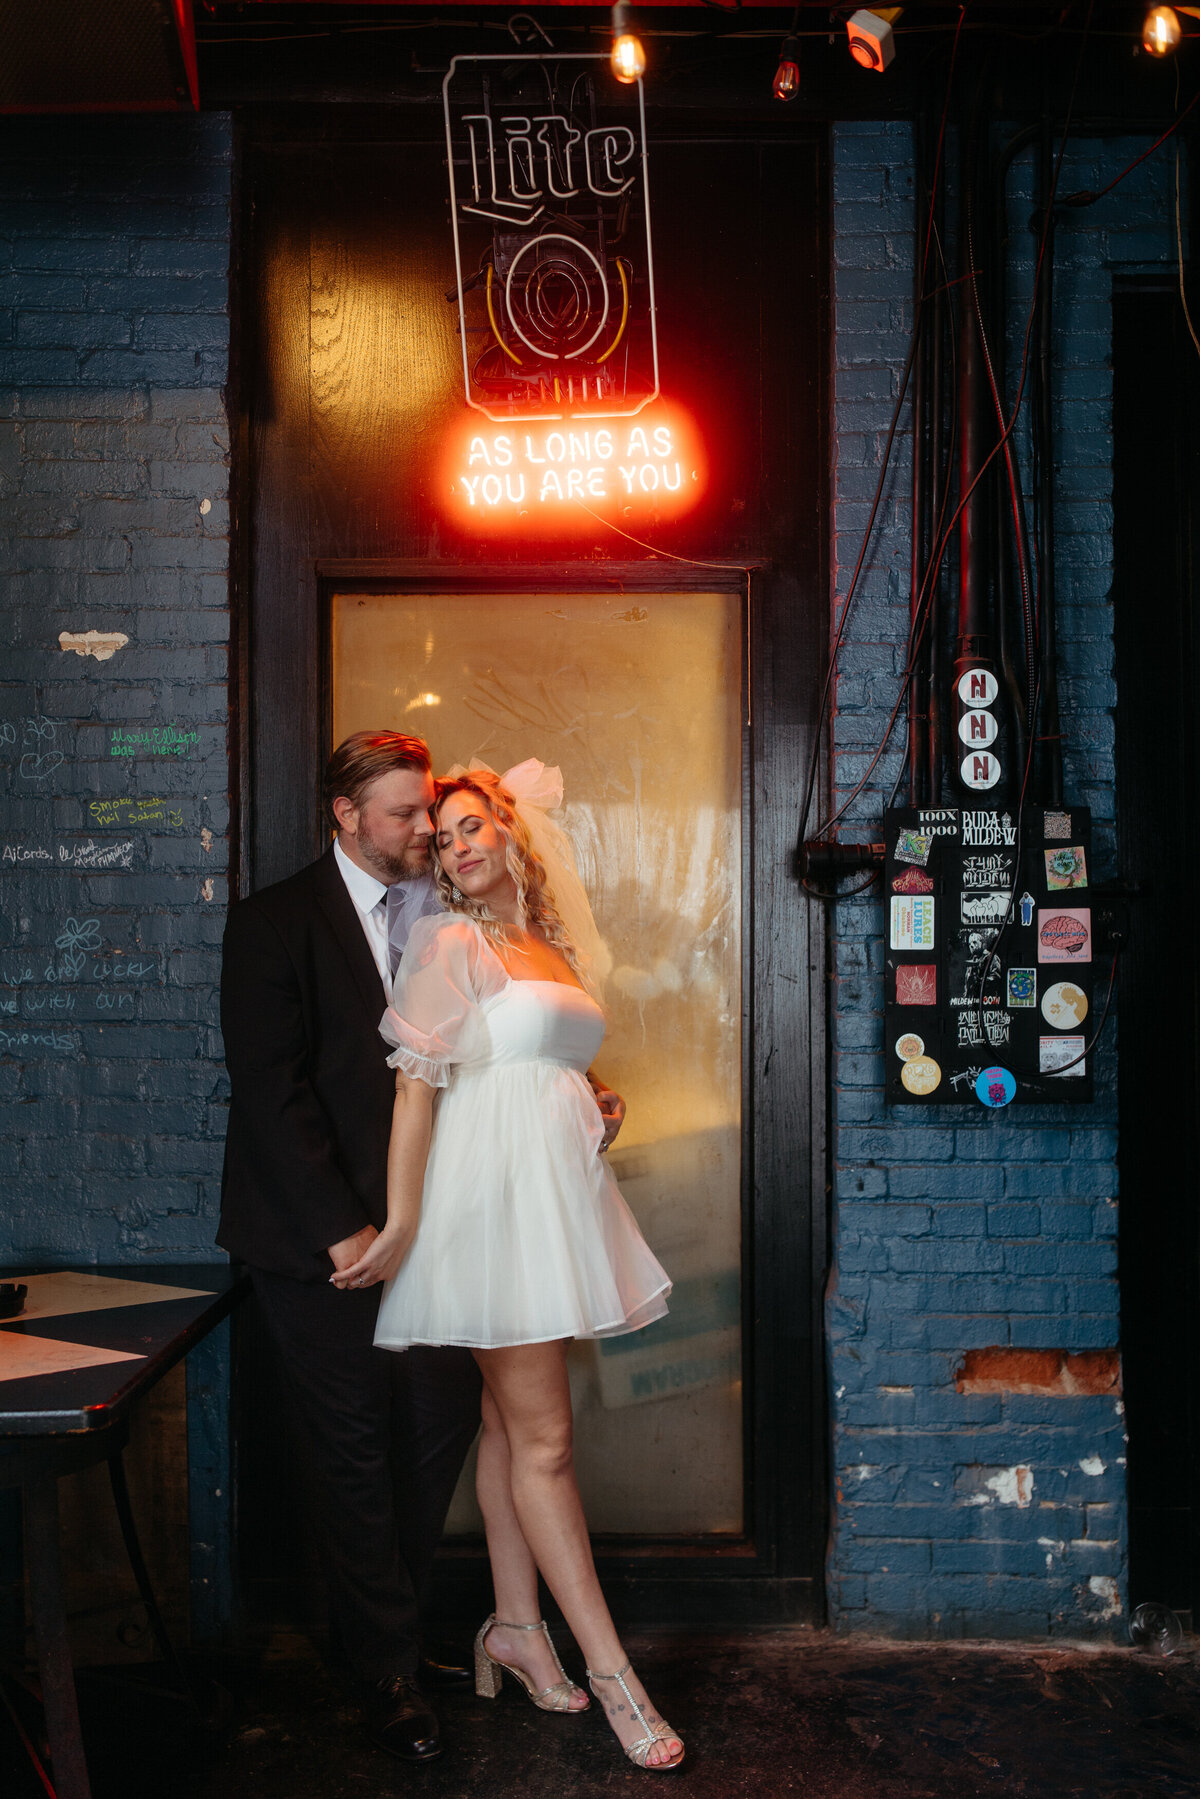 An affectionate couple stands in front of a vibrant neon sign reading 'Live as long as you are you'